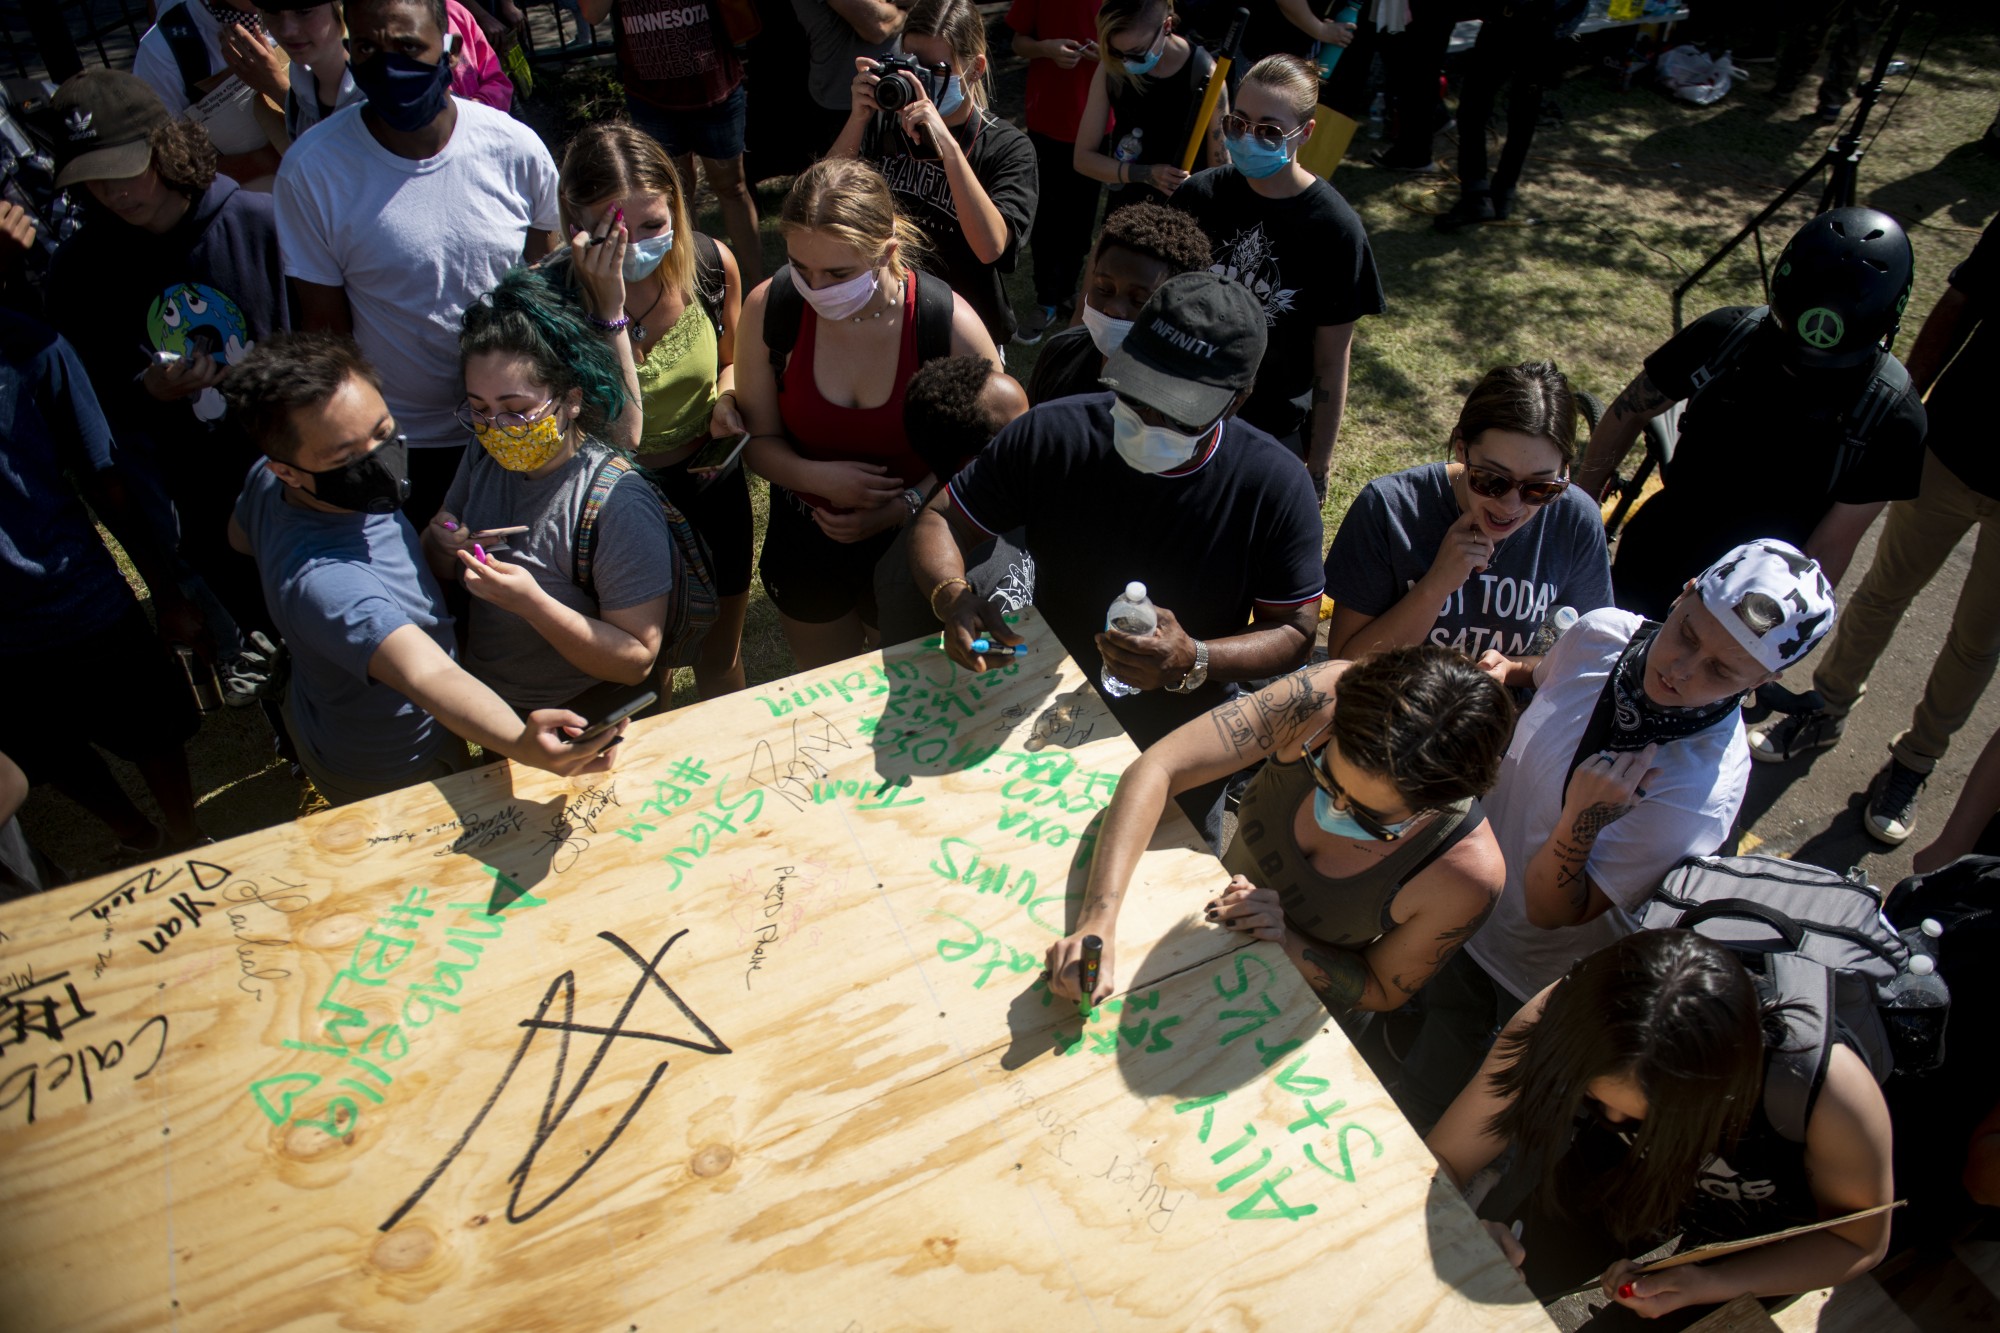 Attendees signed their names to complete a stage constructed near the intersection of East Lake Street and 26th Avenue South on Sunday, May 31. The stage was for speakers to amplify their voices, and organizer Cornell Griffin had volunteers help complete the final steps.